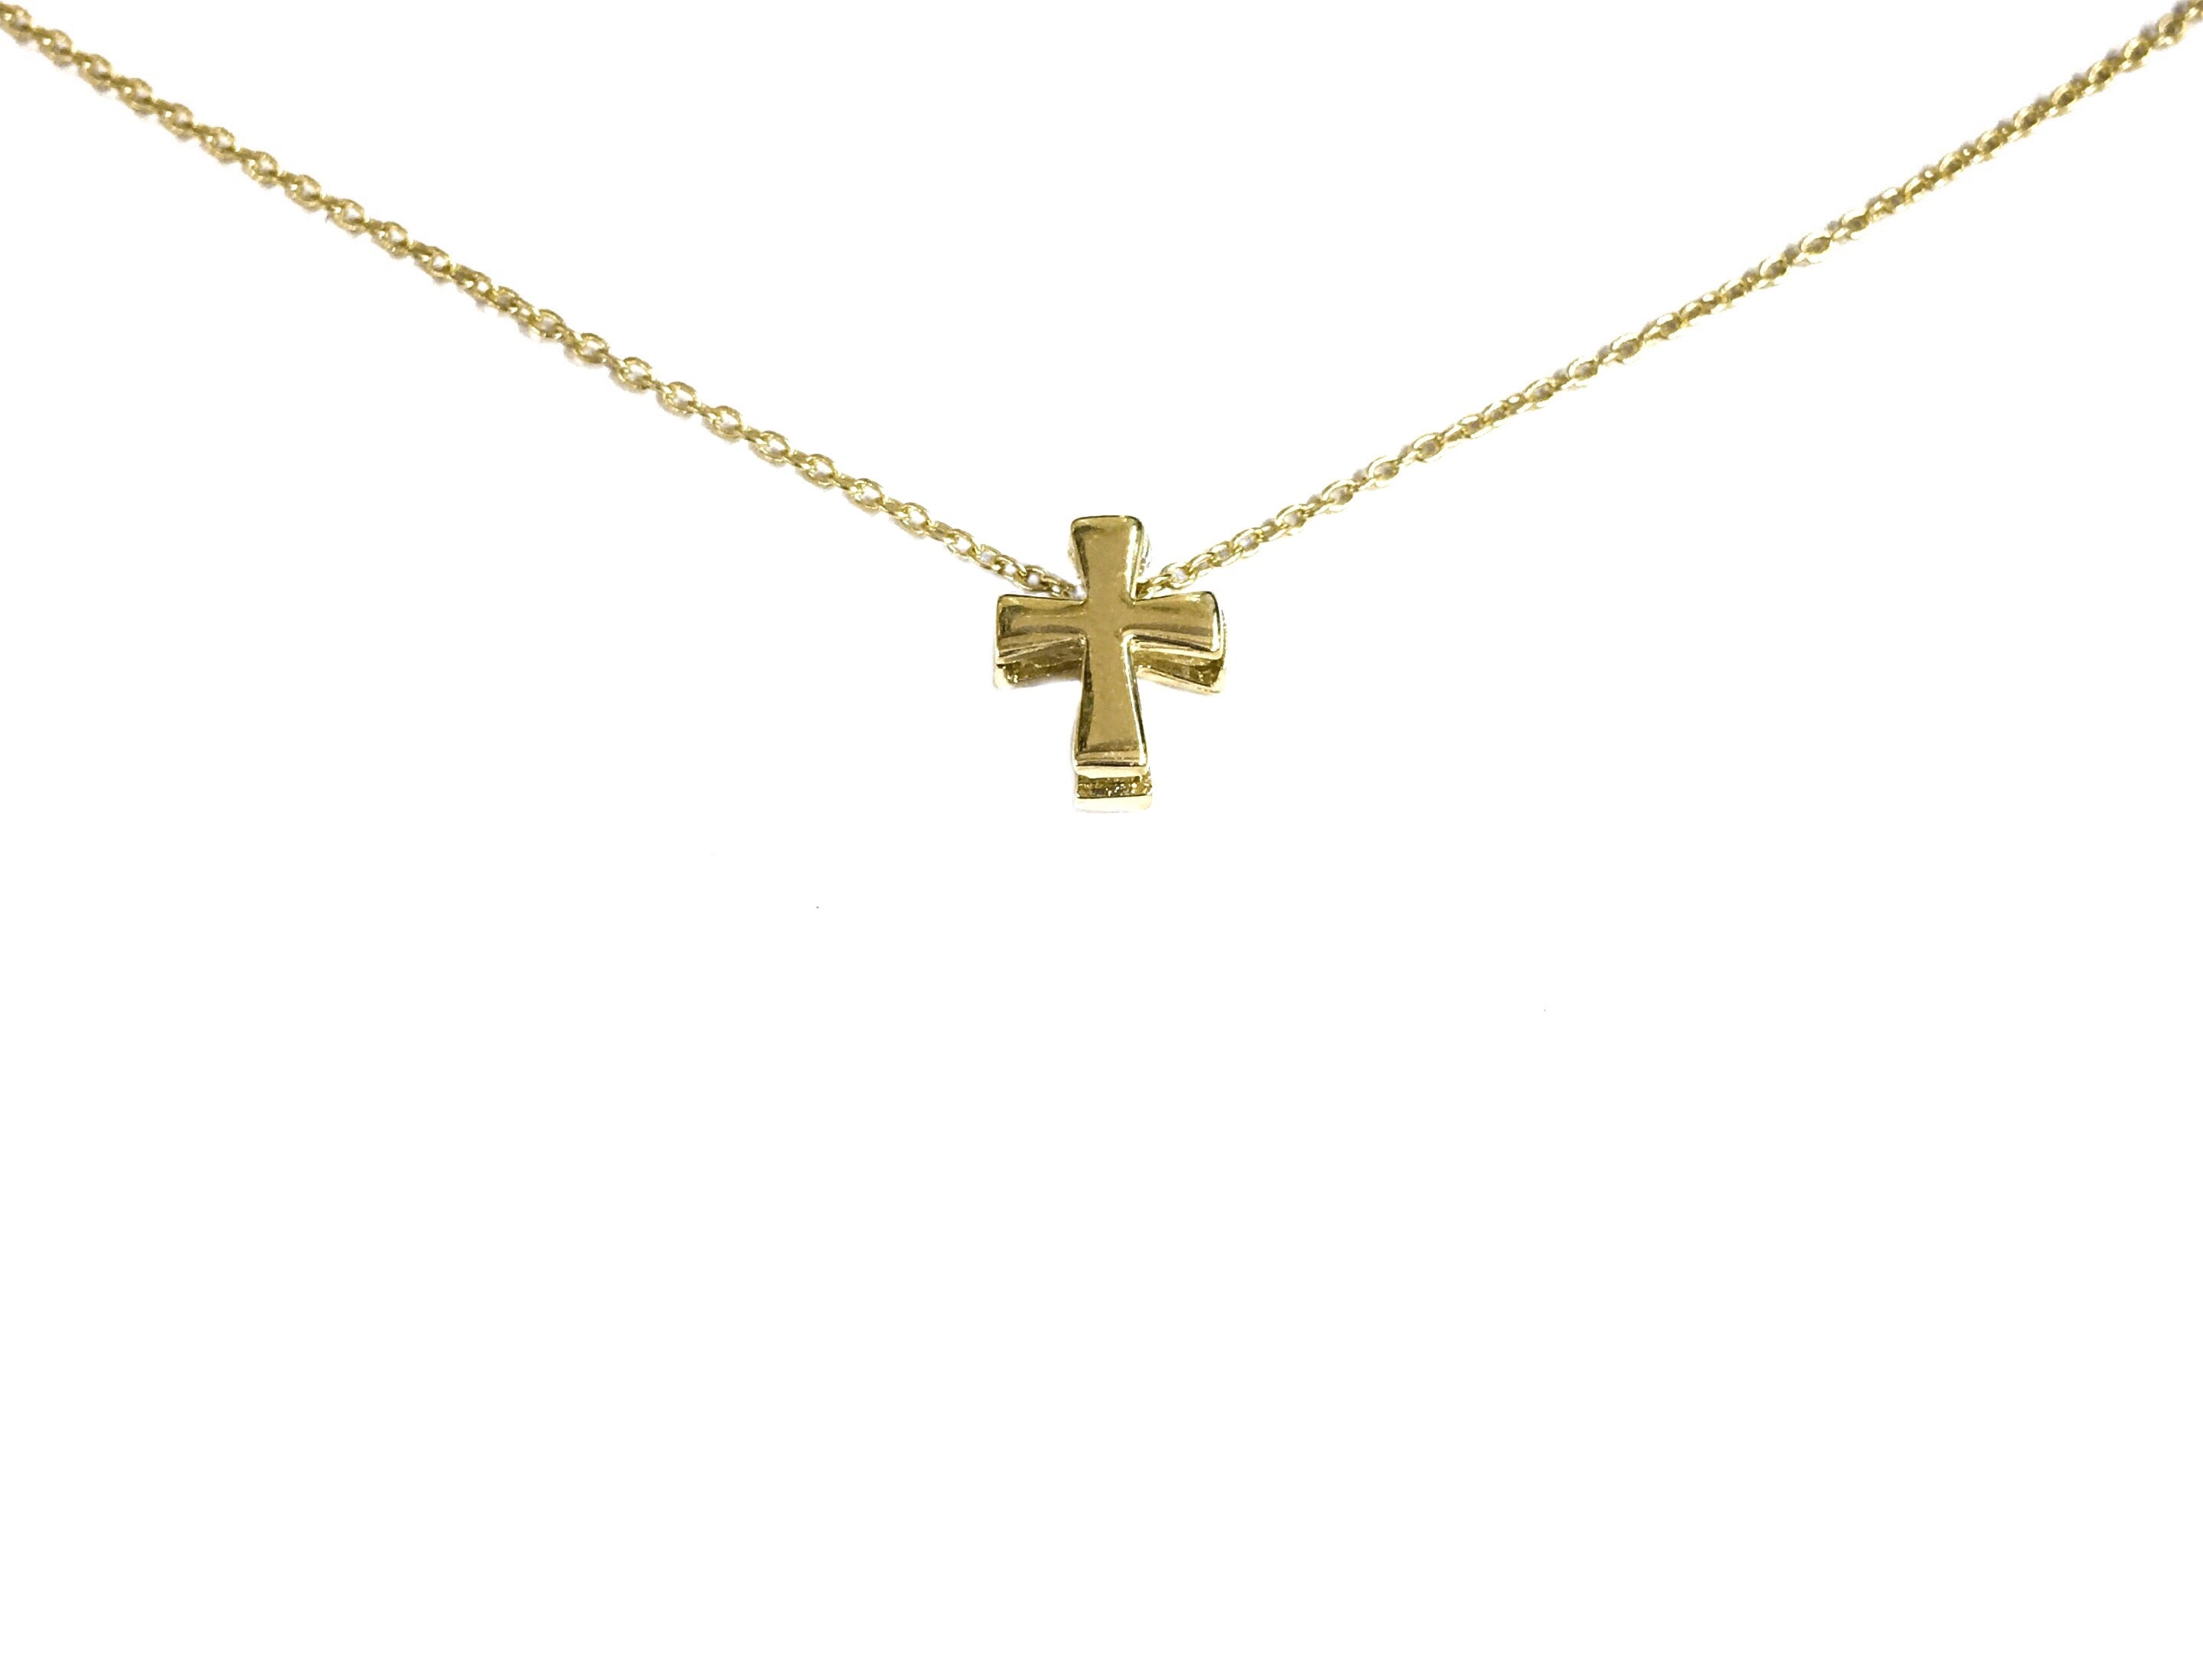 3D MINI FLOATING CROSS NECKLACE